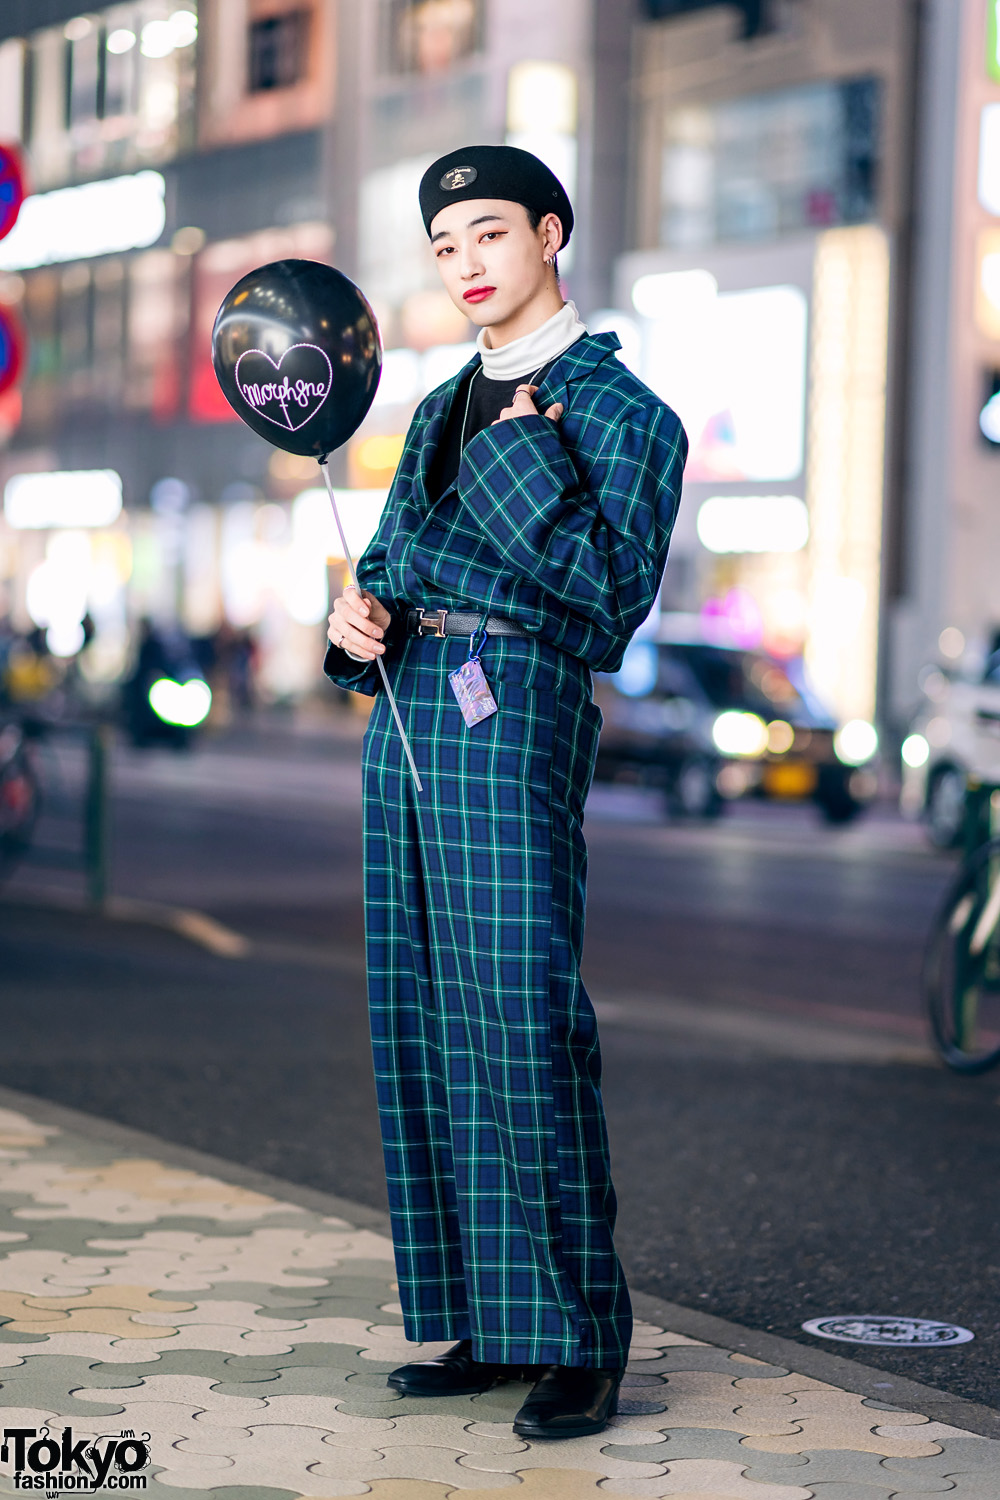 Japanese Model in Harajuku w/ More Than Dope Plaid Suit, Never Mind the XU, Gucci Pendant Necklace, Hermes & Morph8ne Balloon